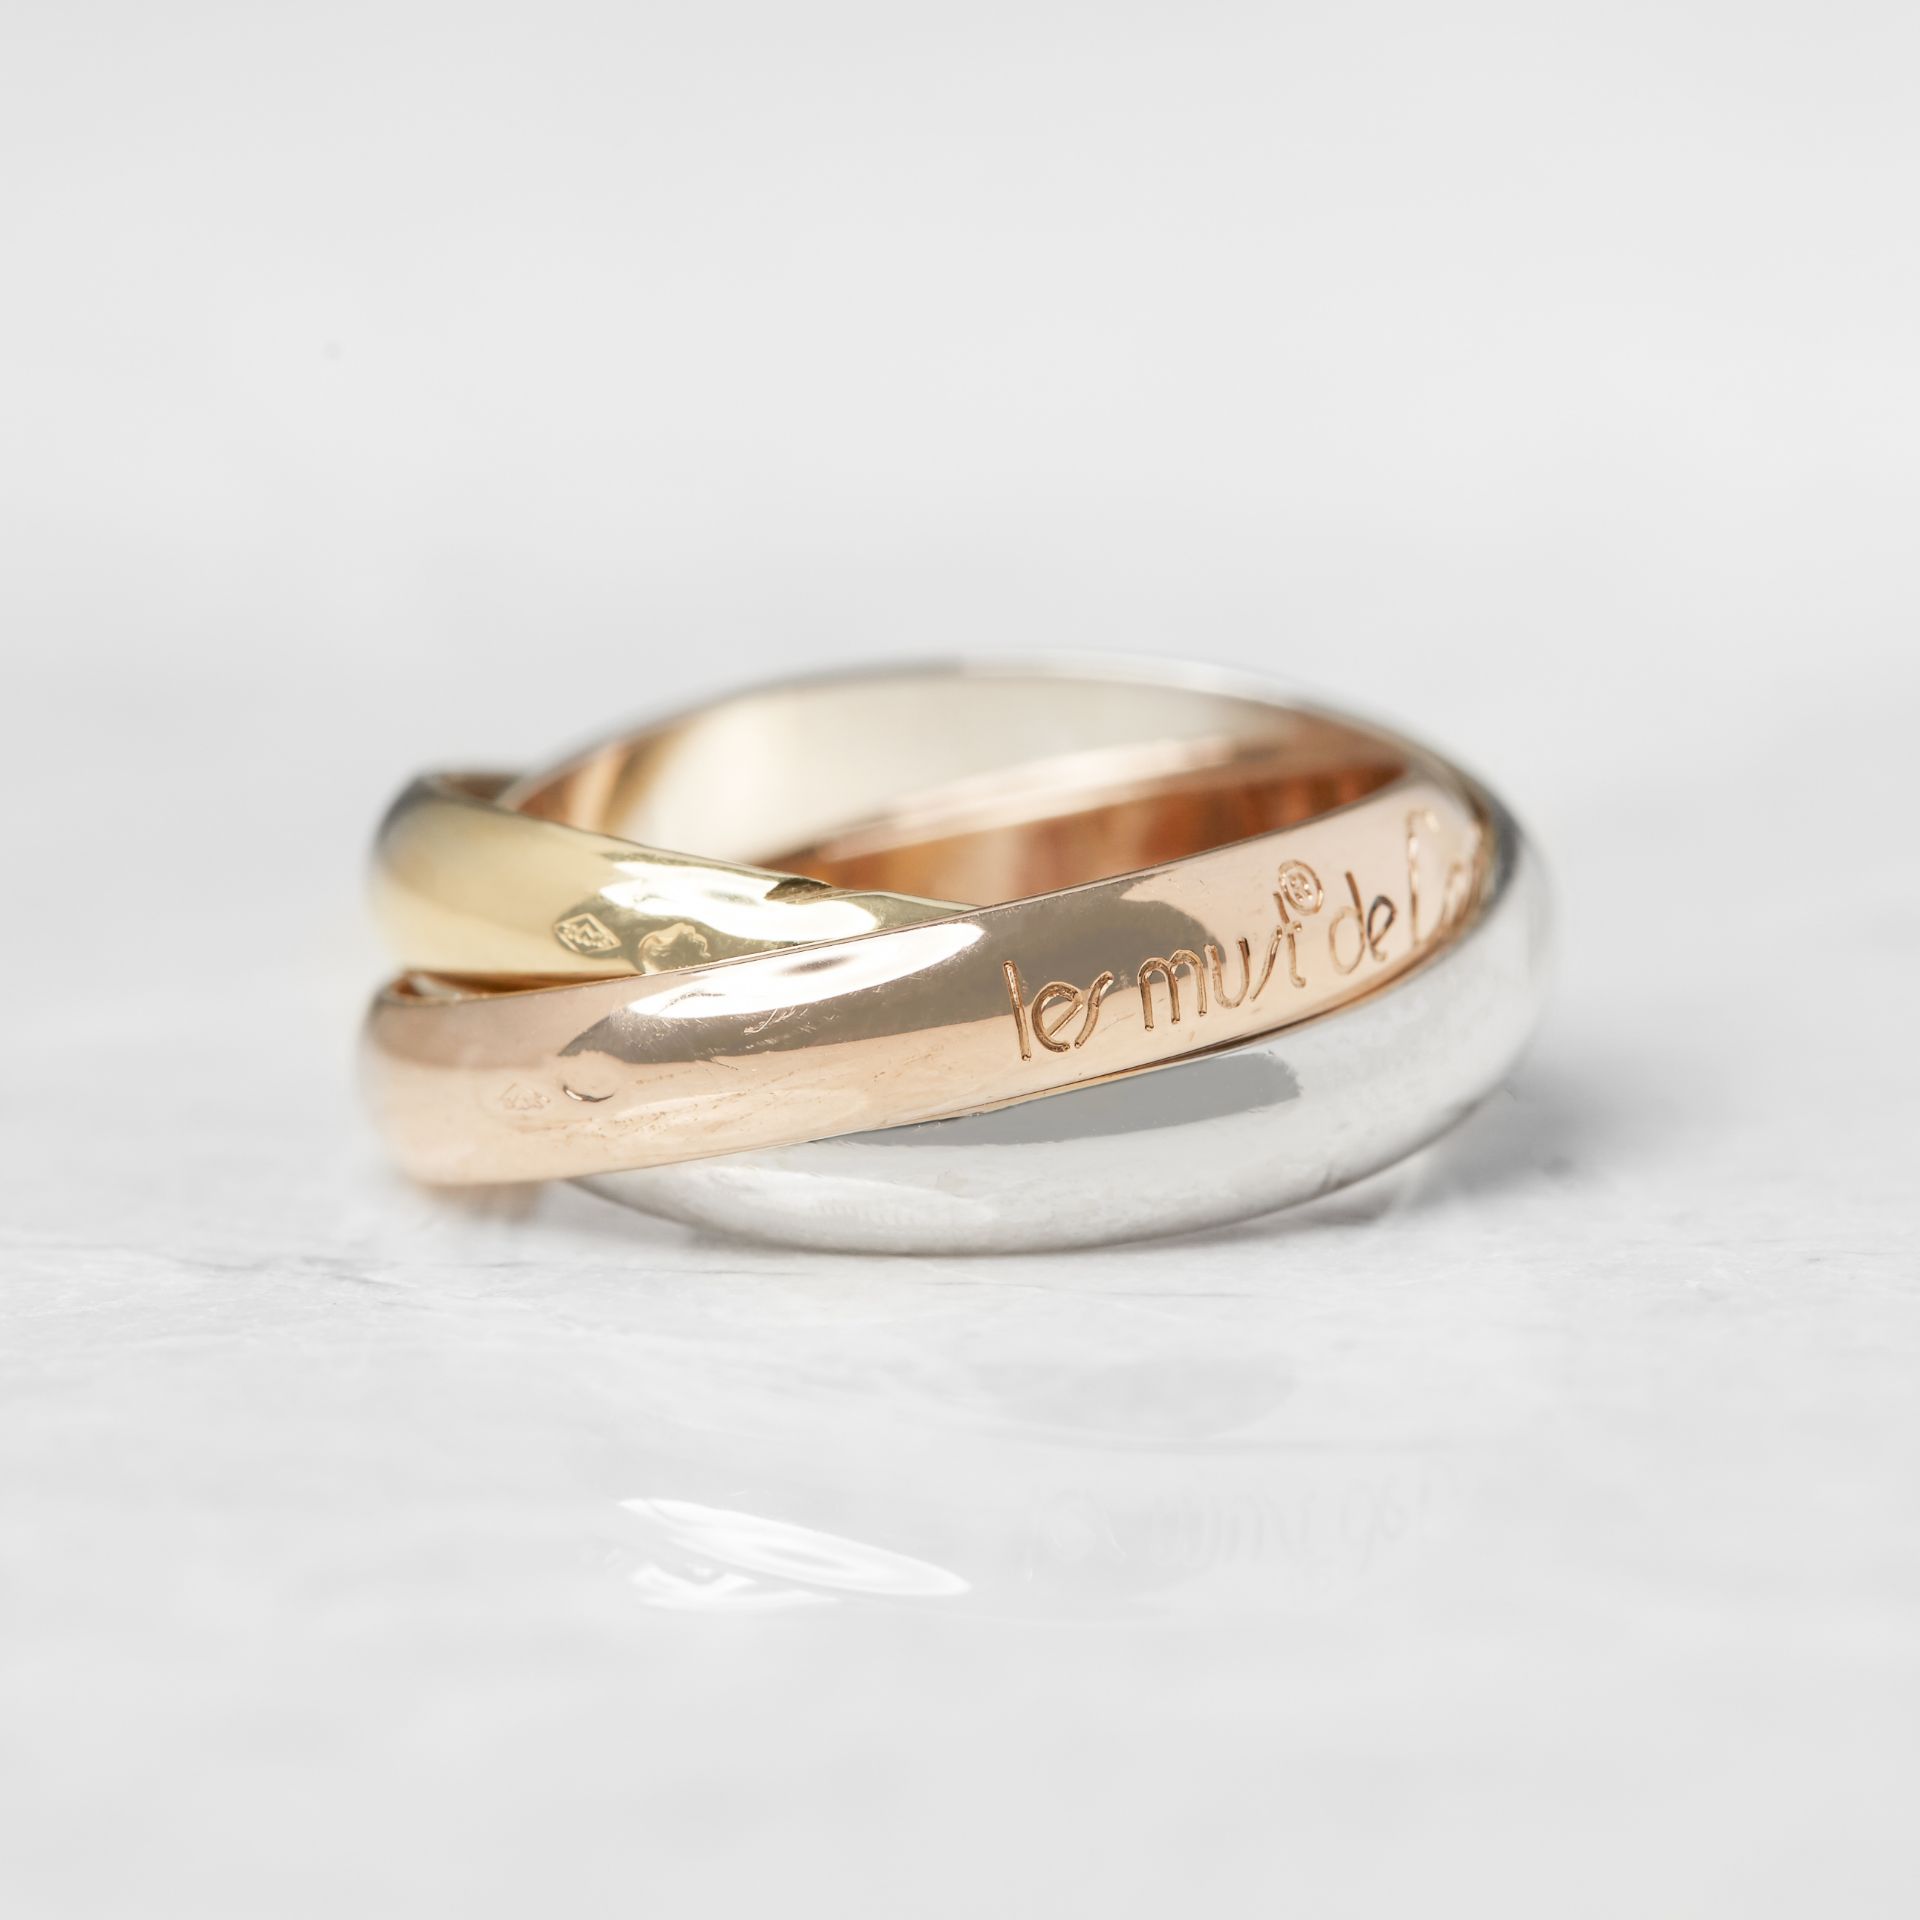 Cartier 18k Yellow, White & Rose Gold Trinity Ring - Image 8 of 18